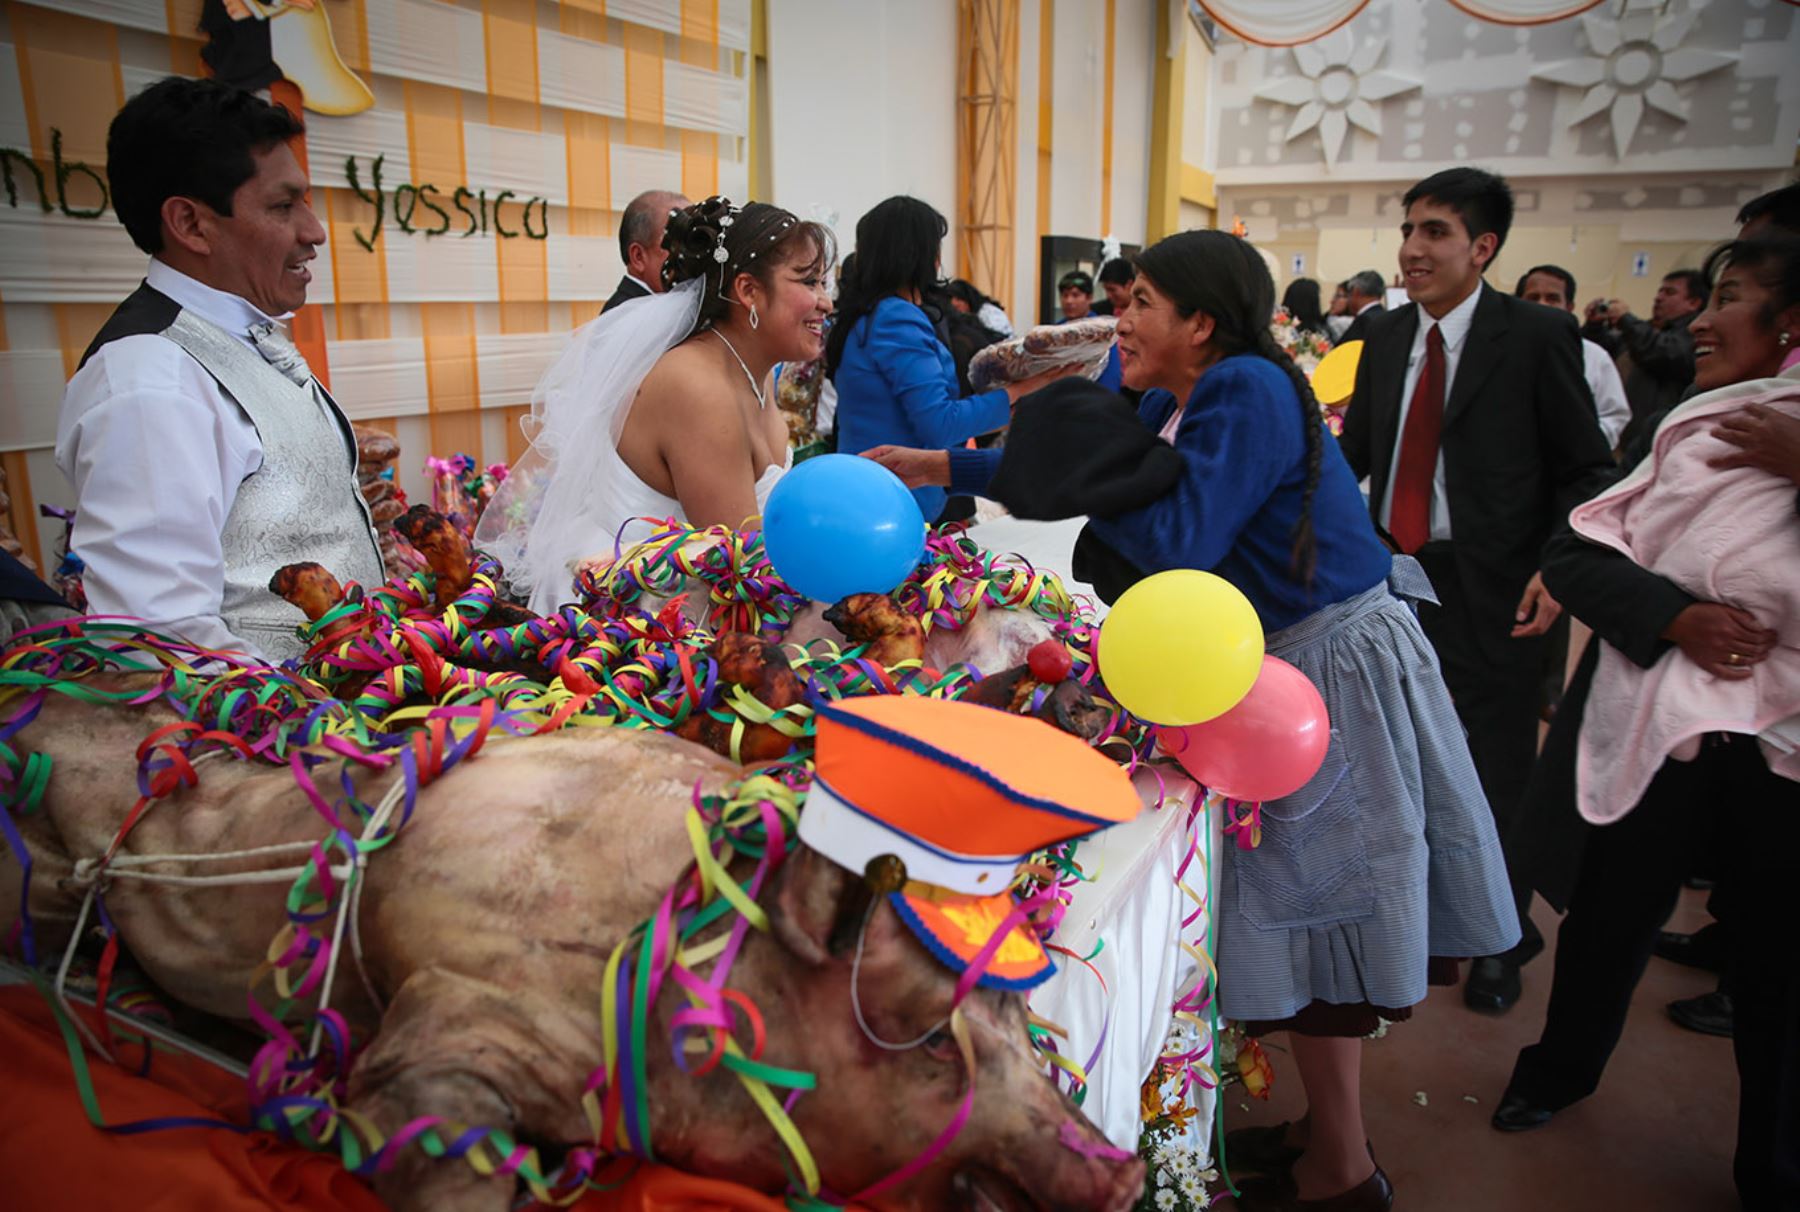 Newlyweds receive gifts as a symbol of abundance and prosperity.  (Andean)